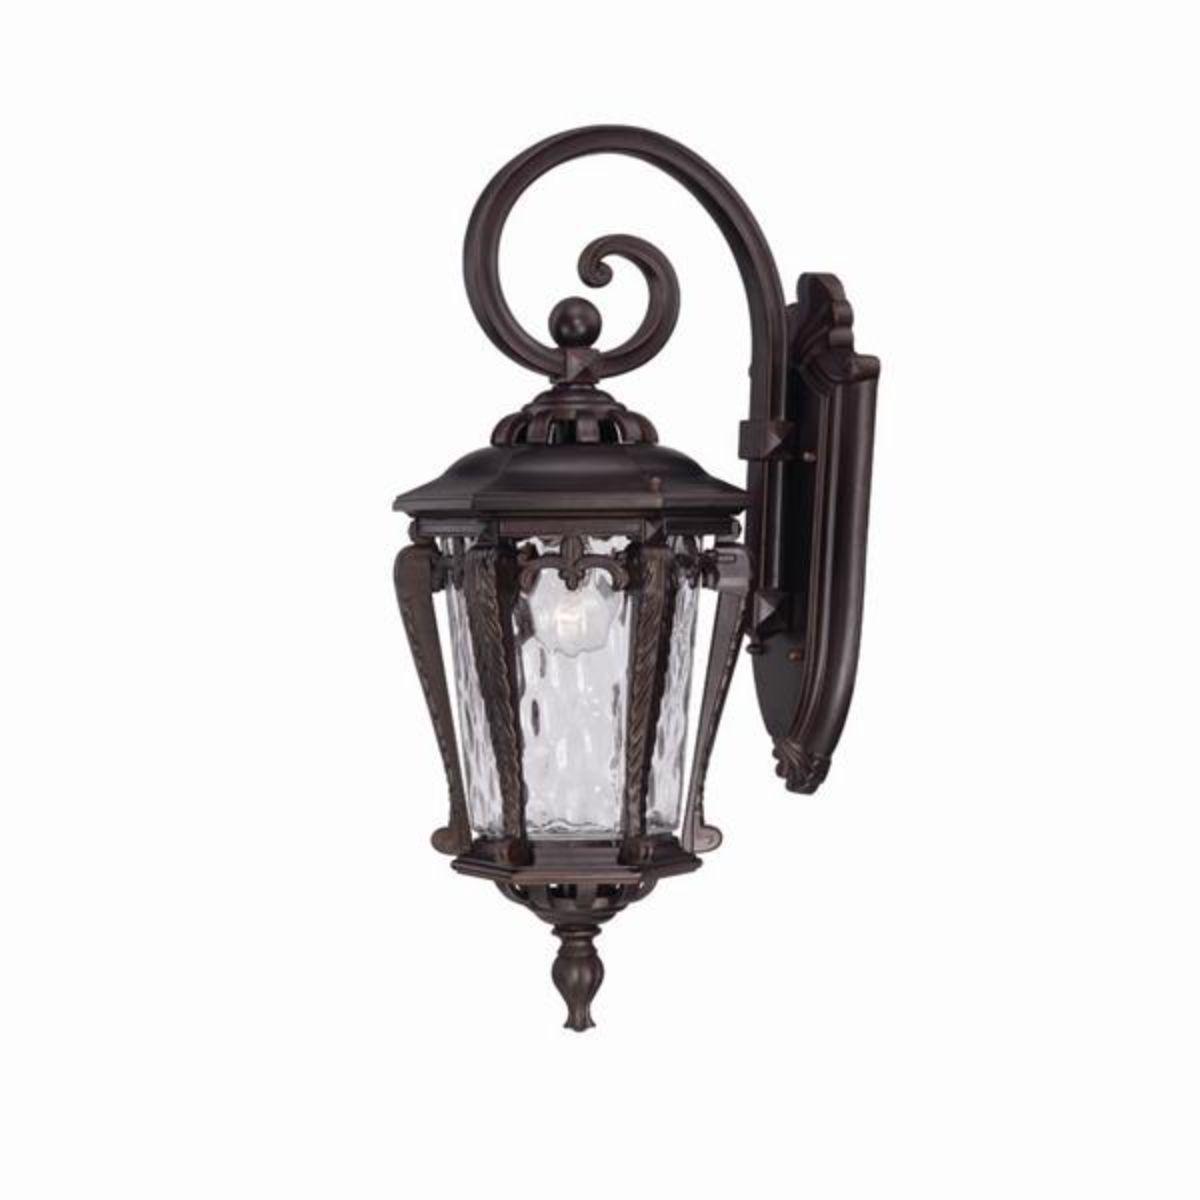 Stratford 23 In. Outdoor Wall Light Bronze Finish